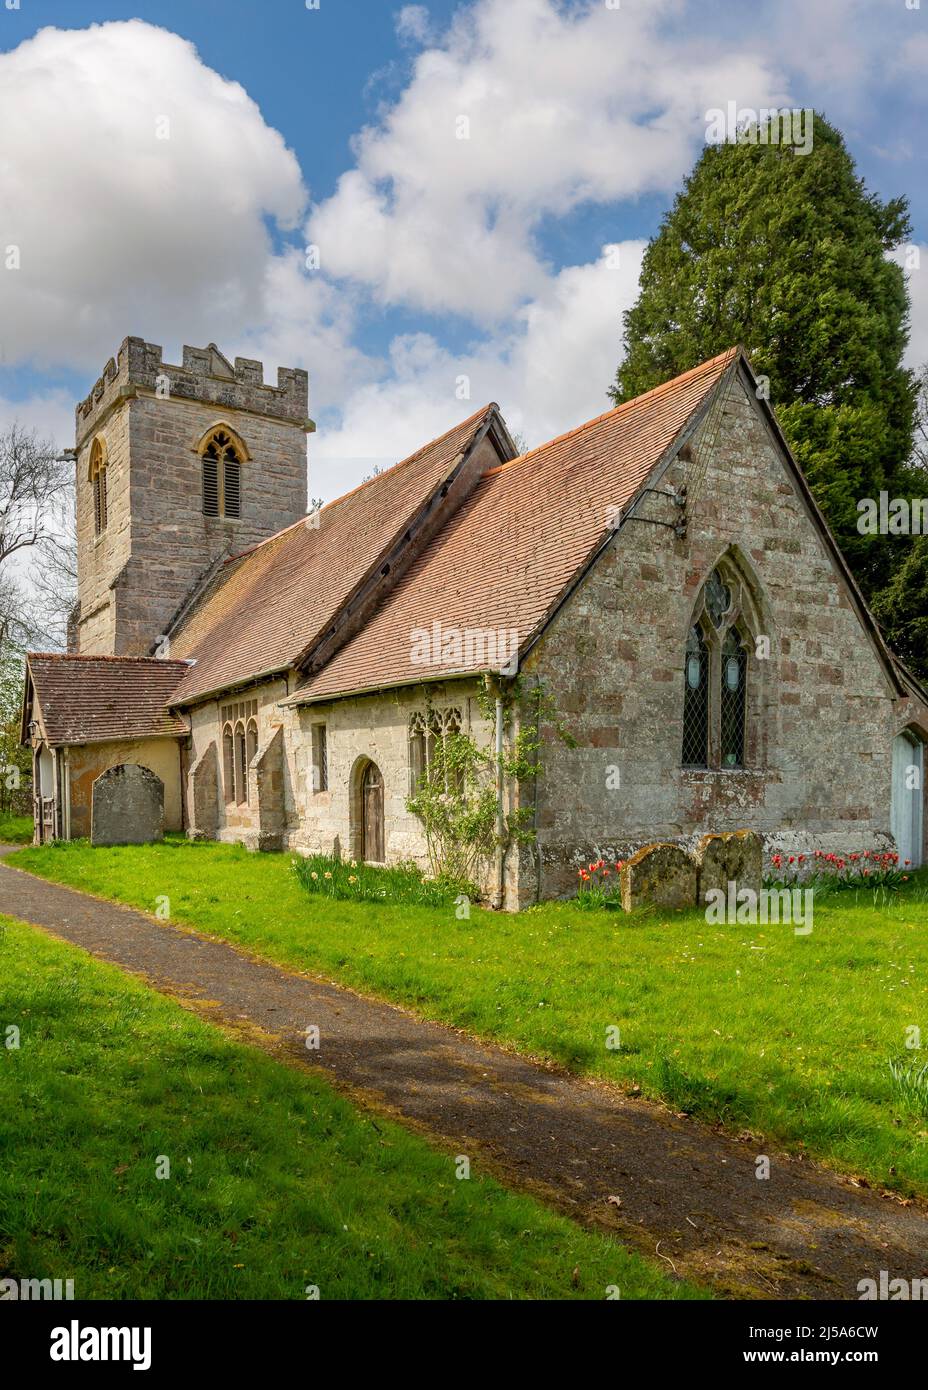 Church of St. Peter in Abbots Morton, Worcestershire, England. Stock Photo